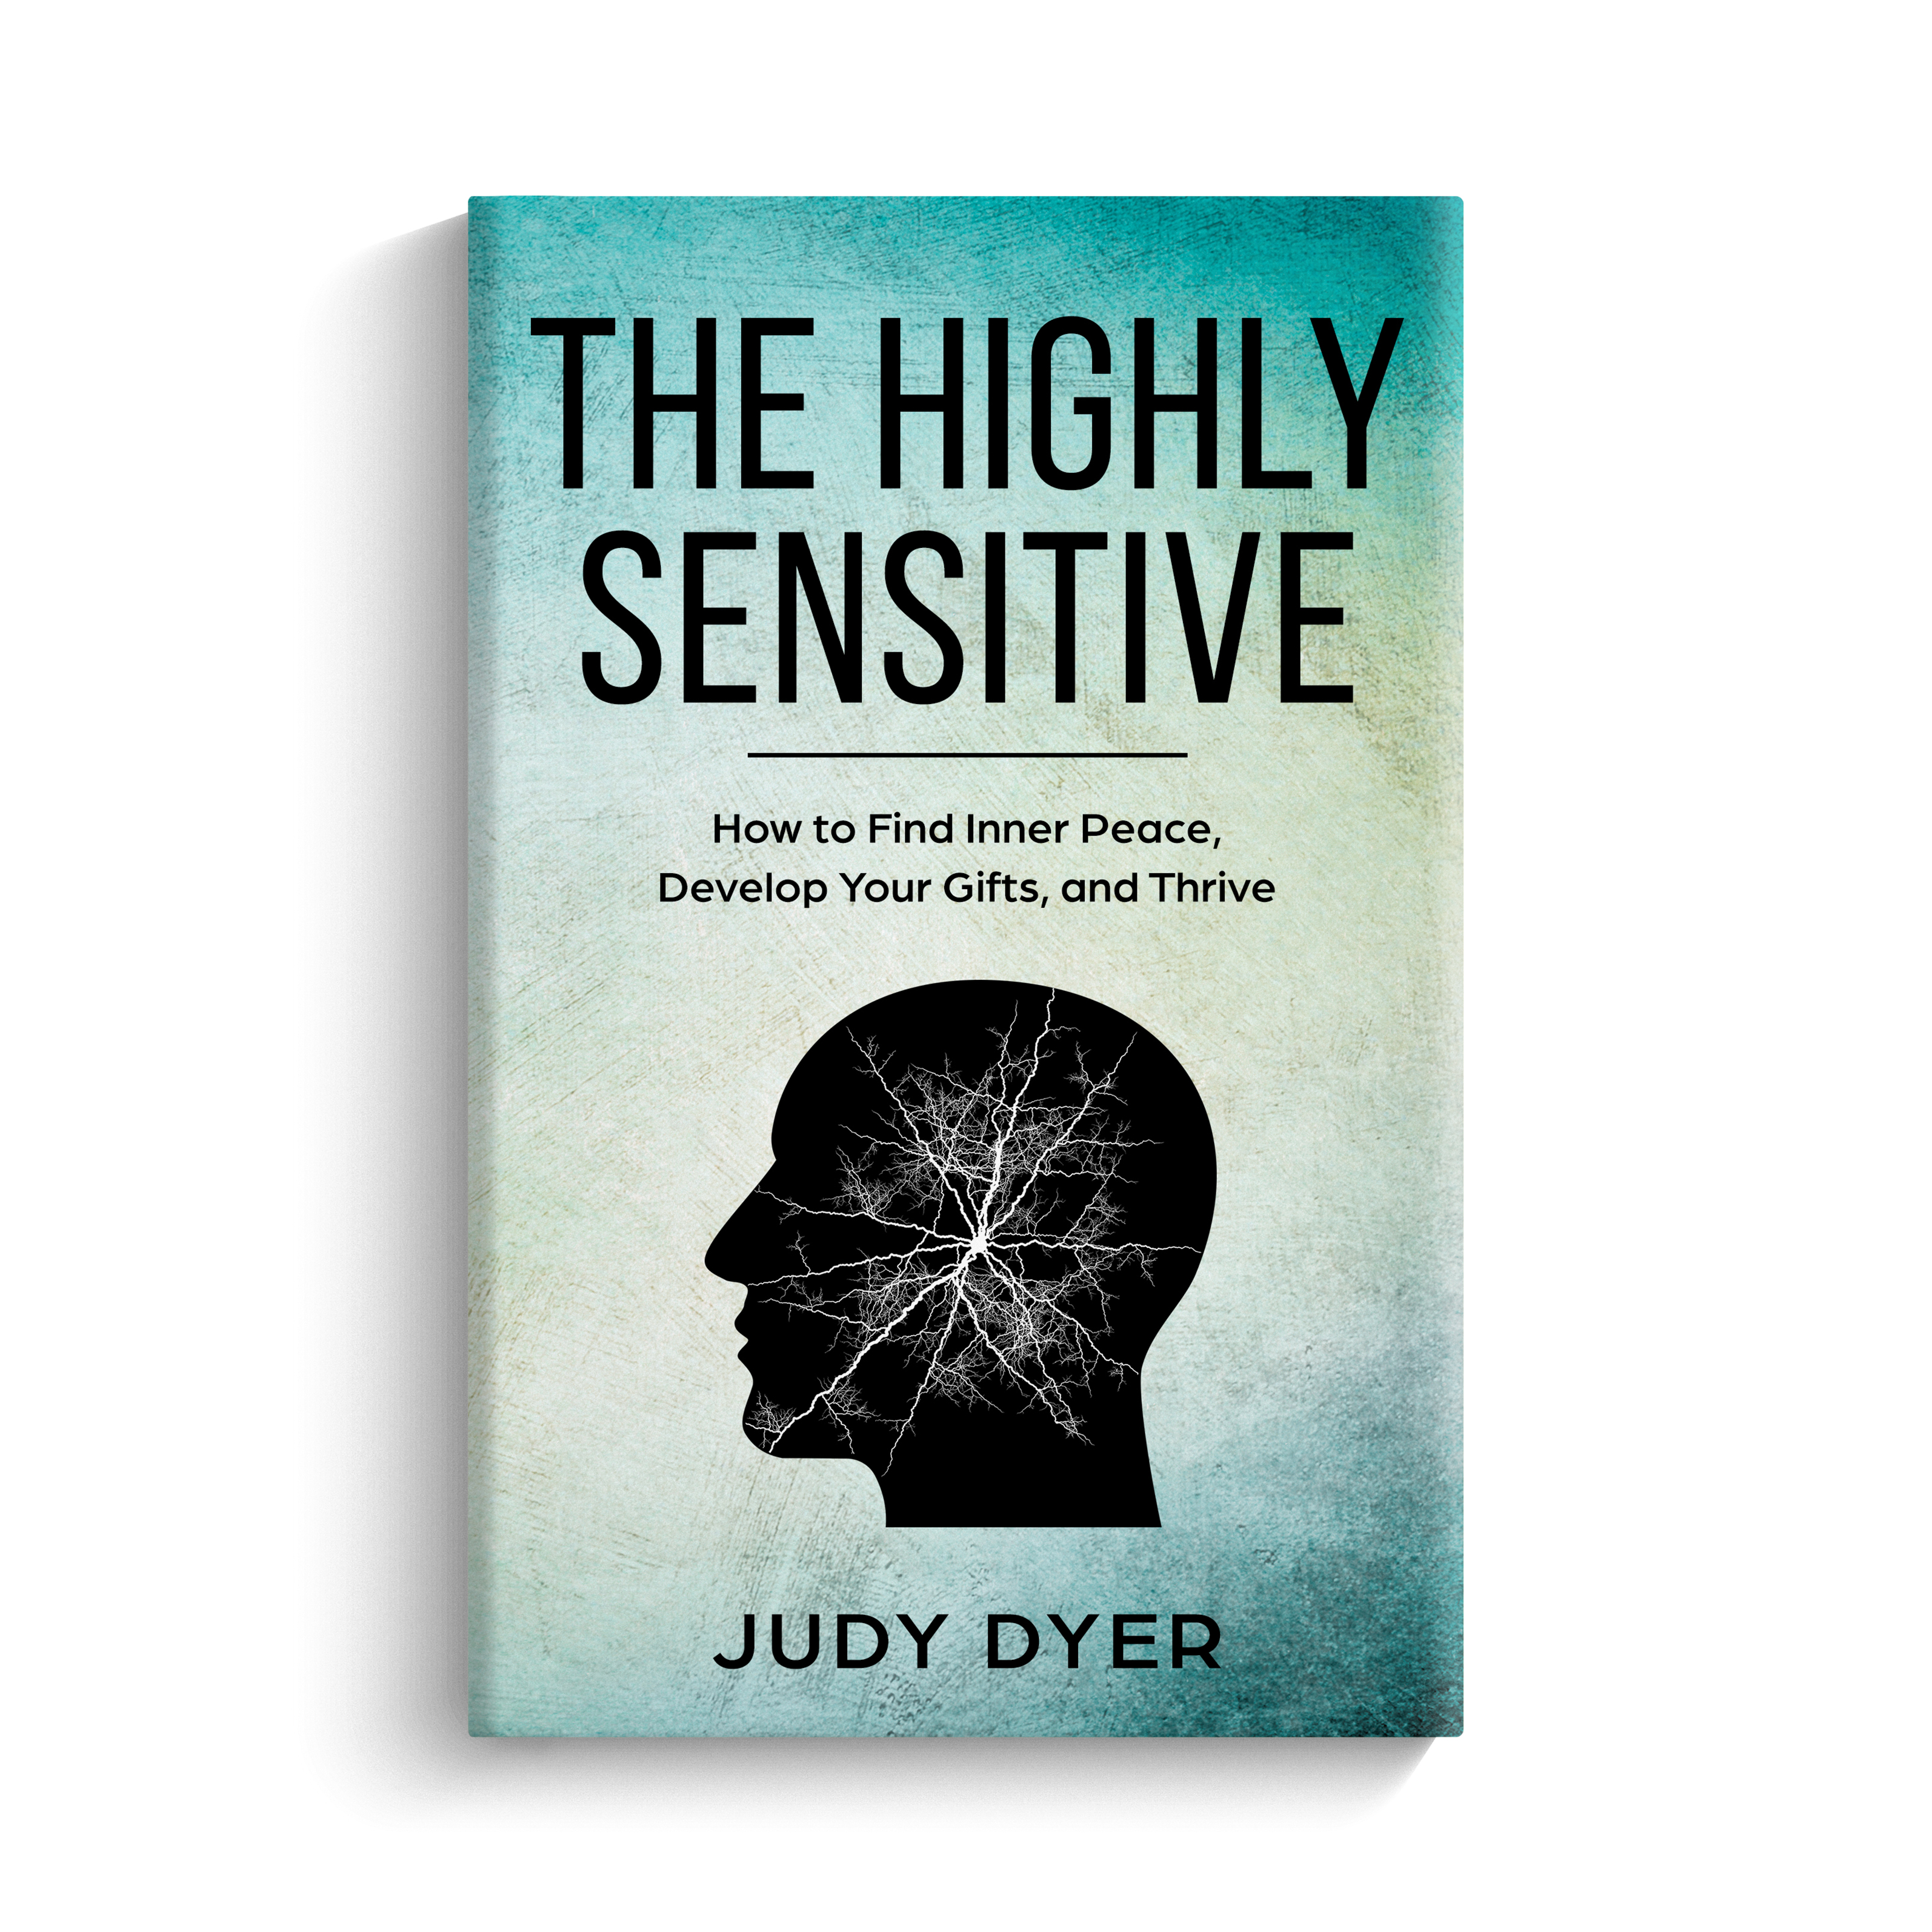 The Highly Sensitive by Judy Dyer